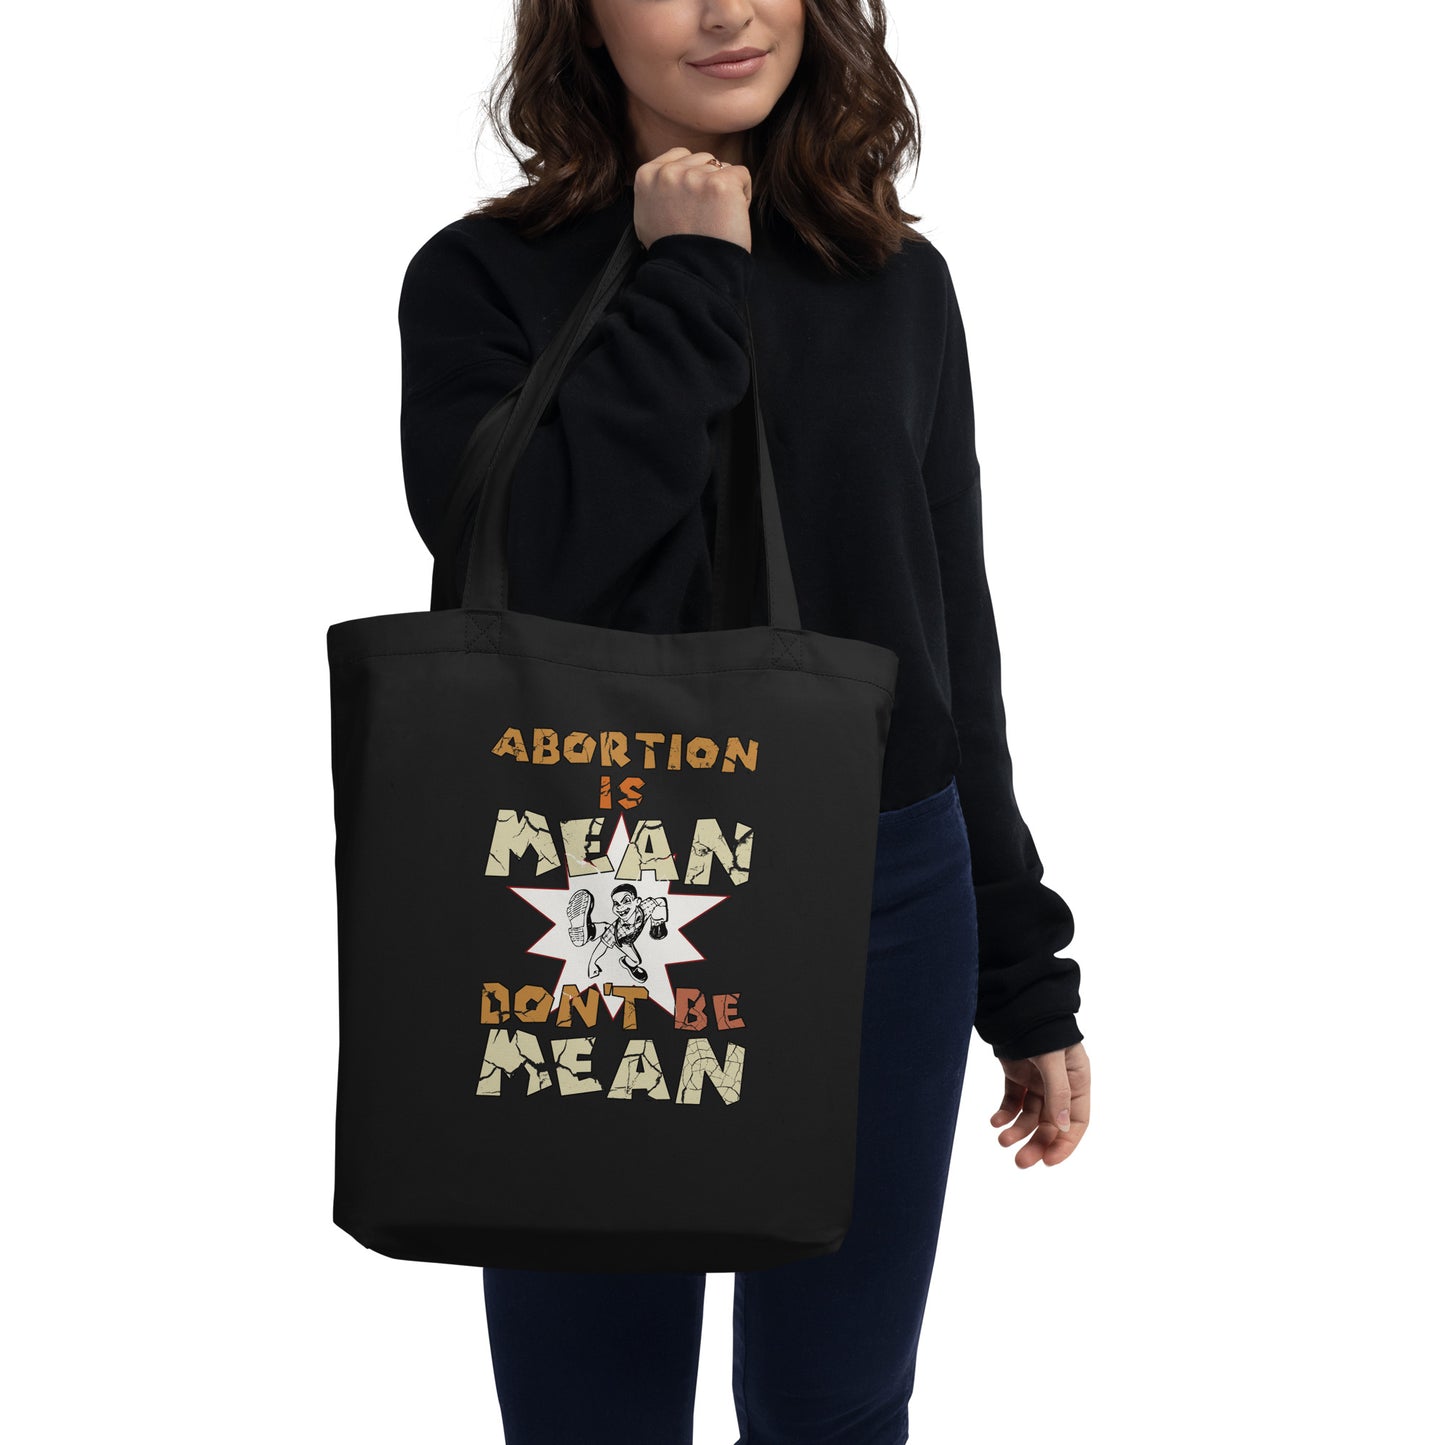 A001 Tote – Eco Tote Bag Featuring Mean Guy Graphic with text “Abortion is Mean. Don’t be Mean.”